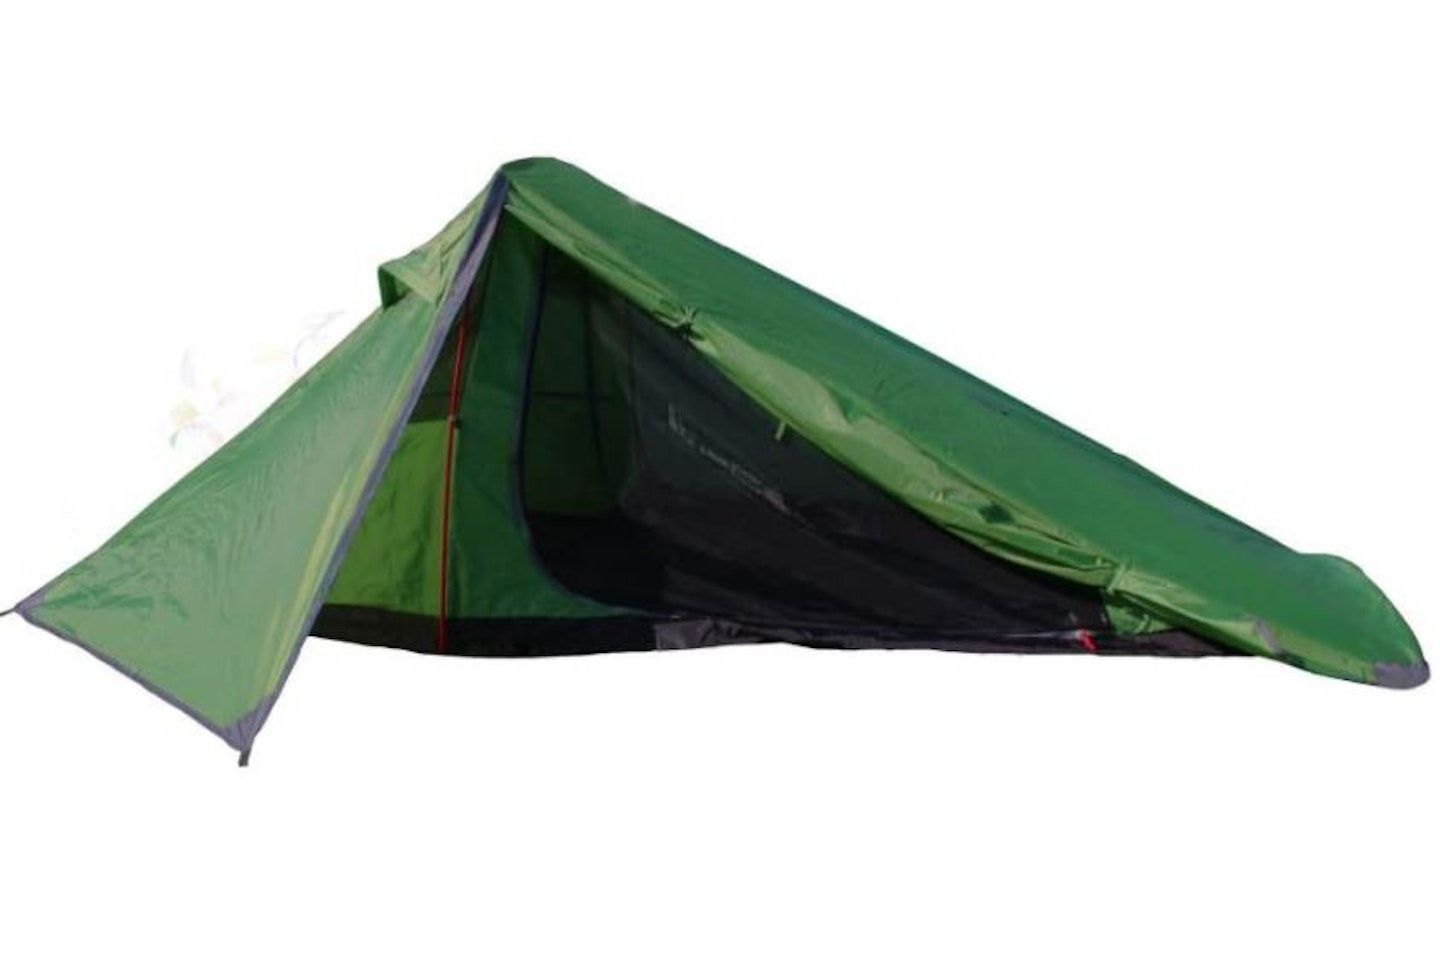 OutdoorGear Backpacker Pro 2 Tent